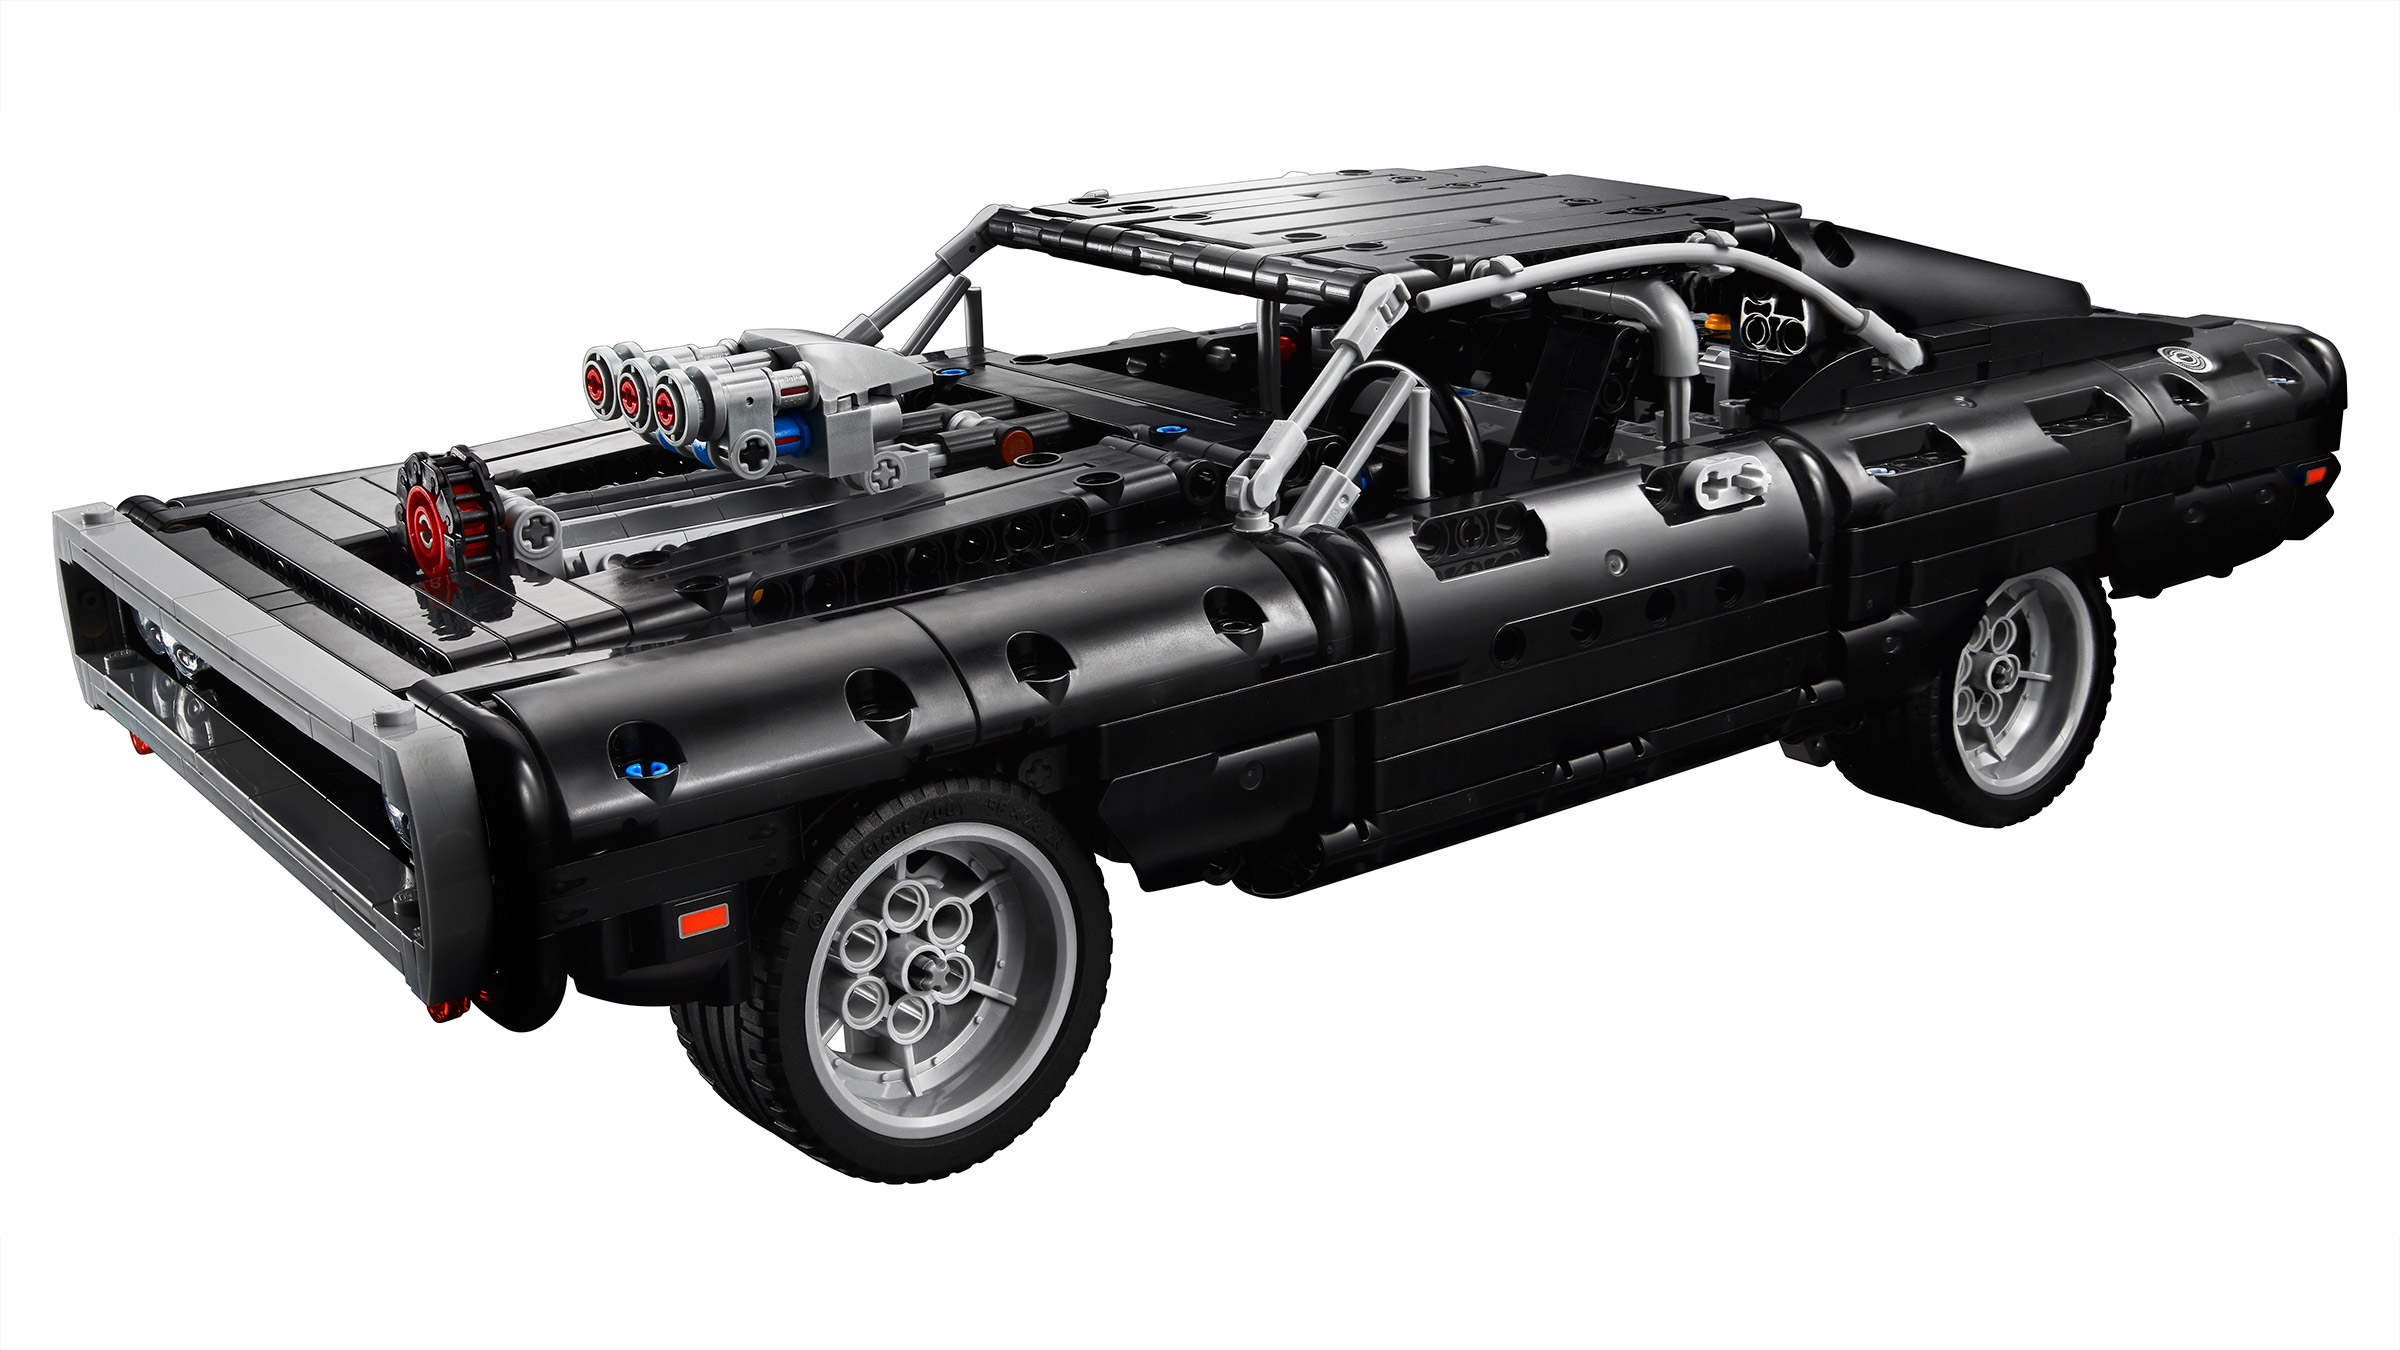 Lego unveils new Dodge Charger from Fast & Furious films 